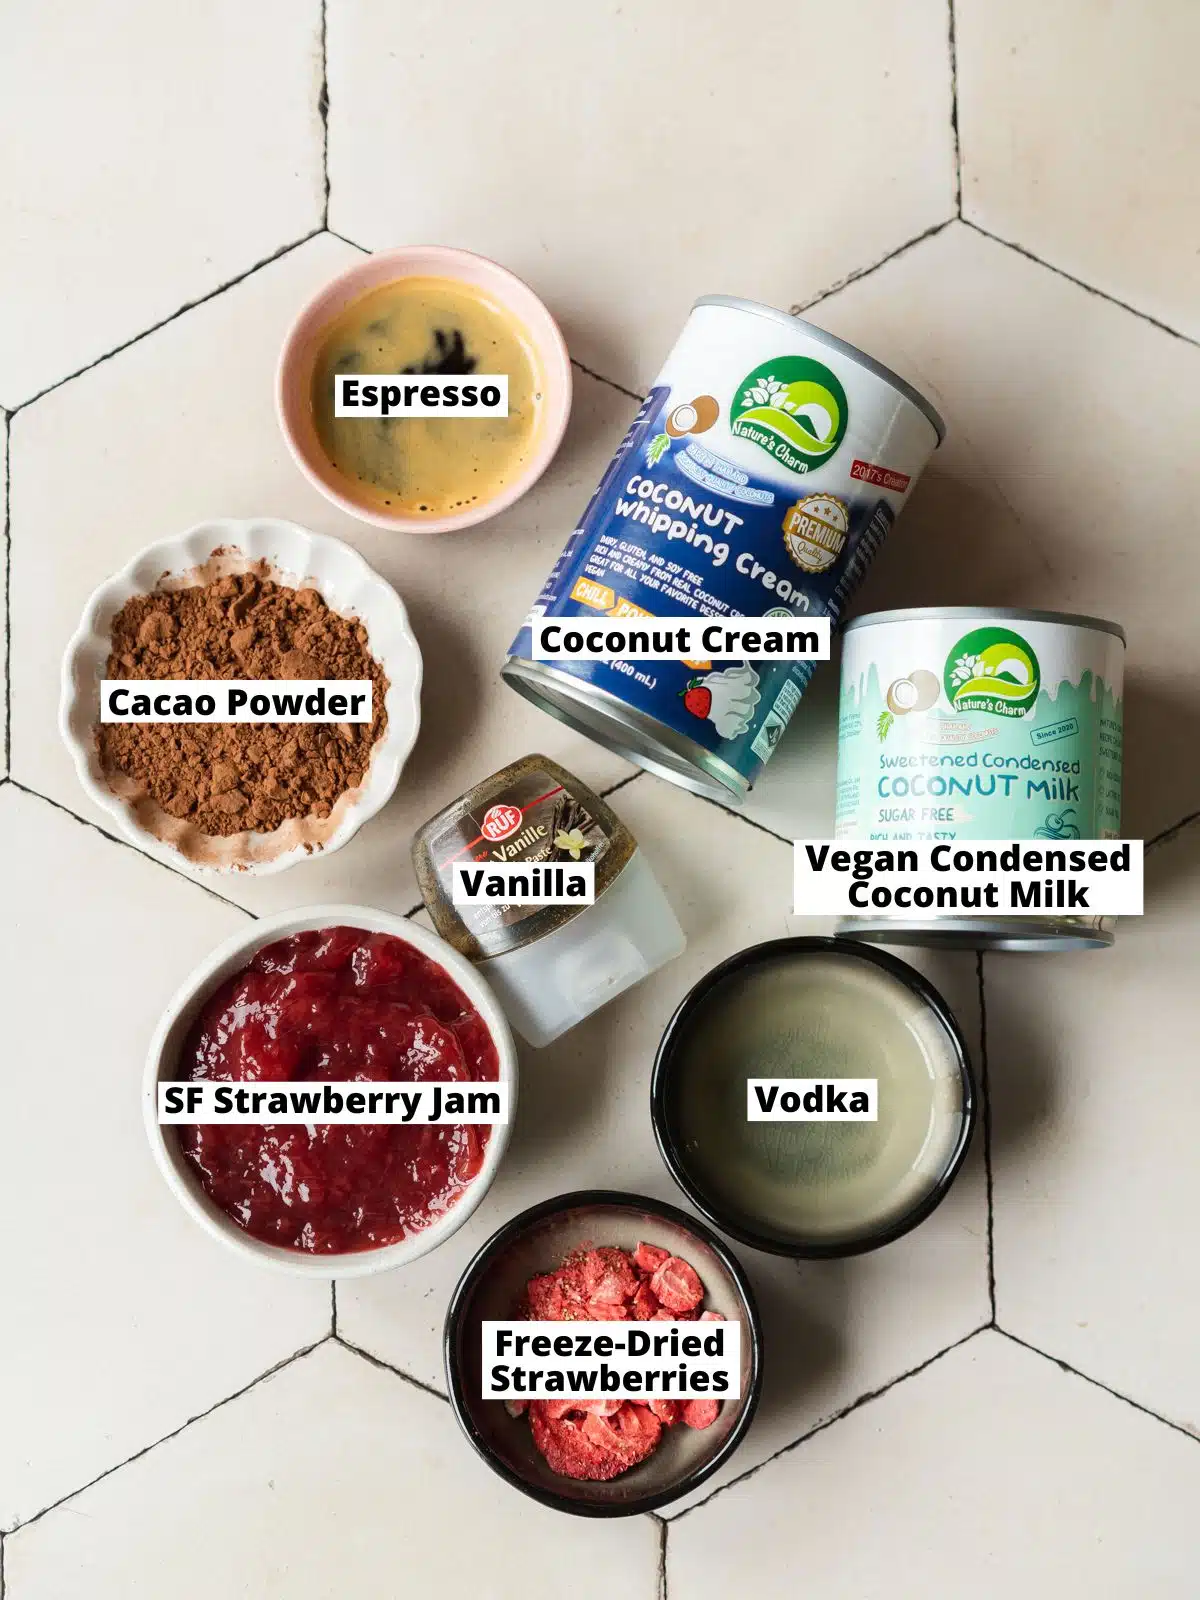 ingredients for vegan neapolitan ice cream cake measured out in bowls on a tiled surface.